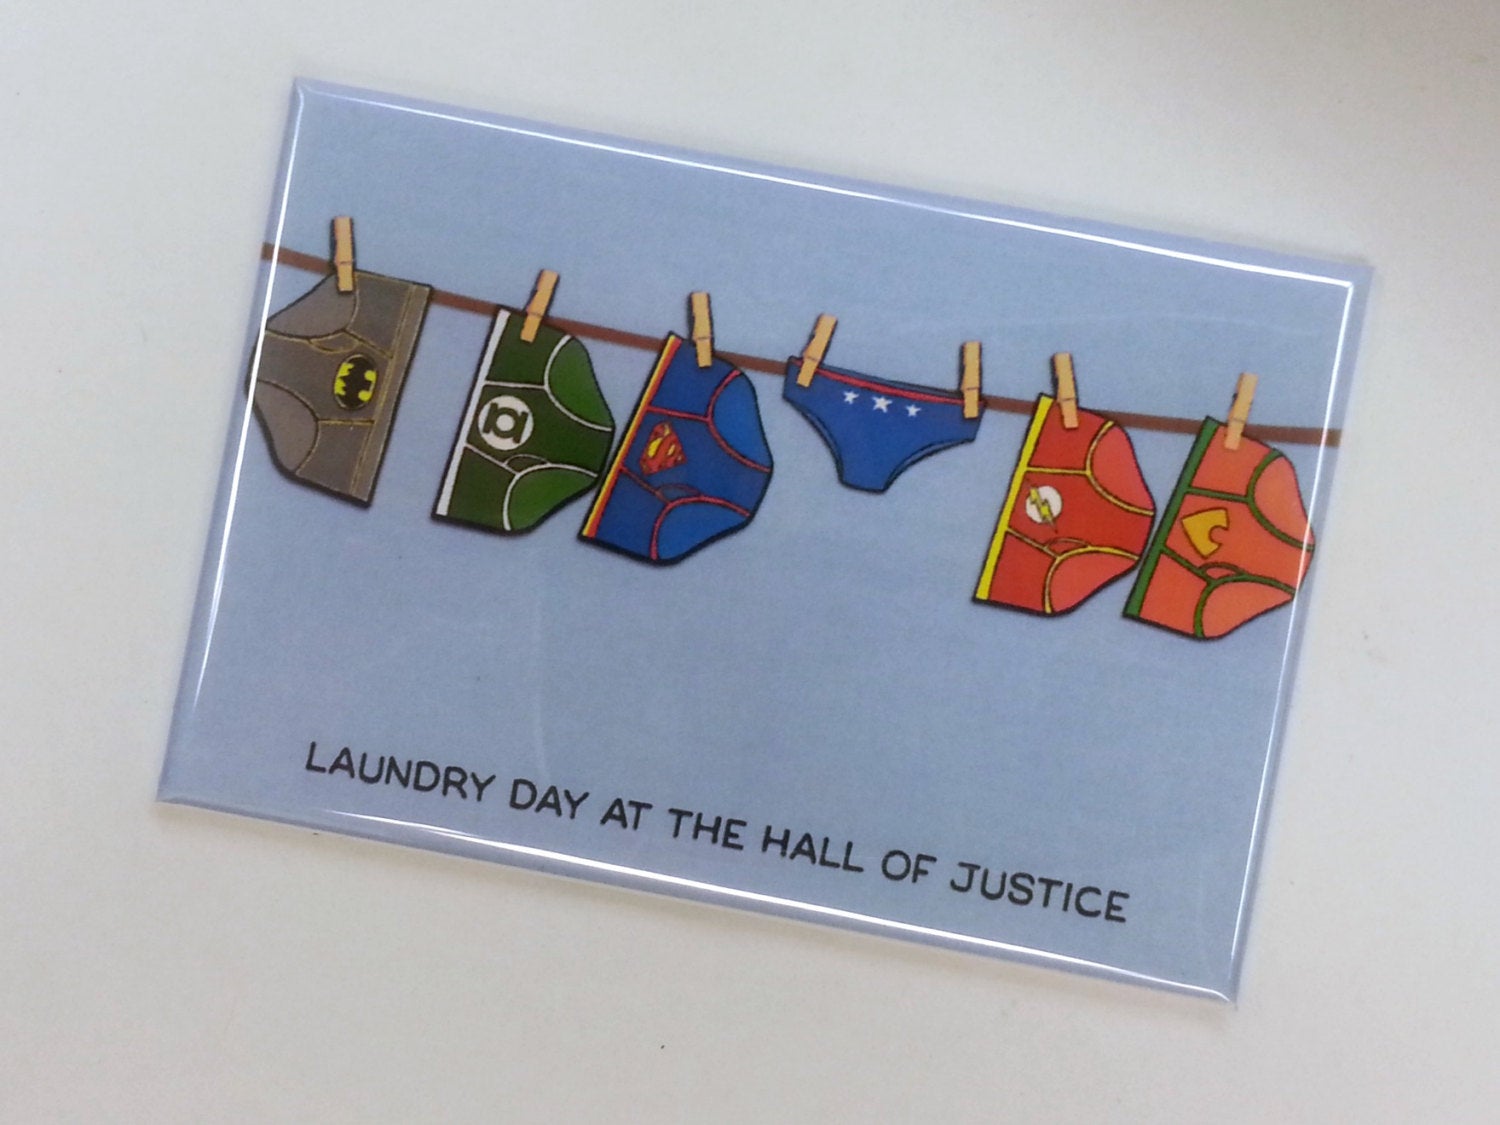 Laundry Day at the Hall of Justice magnet underwear DC fan art